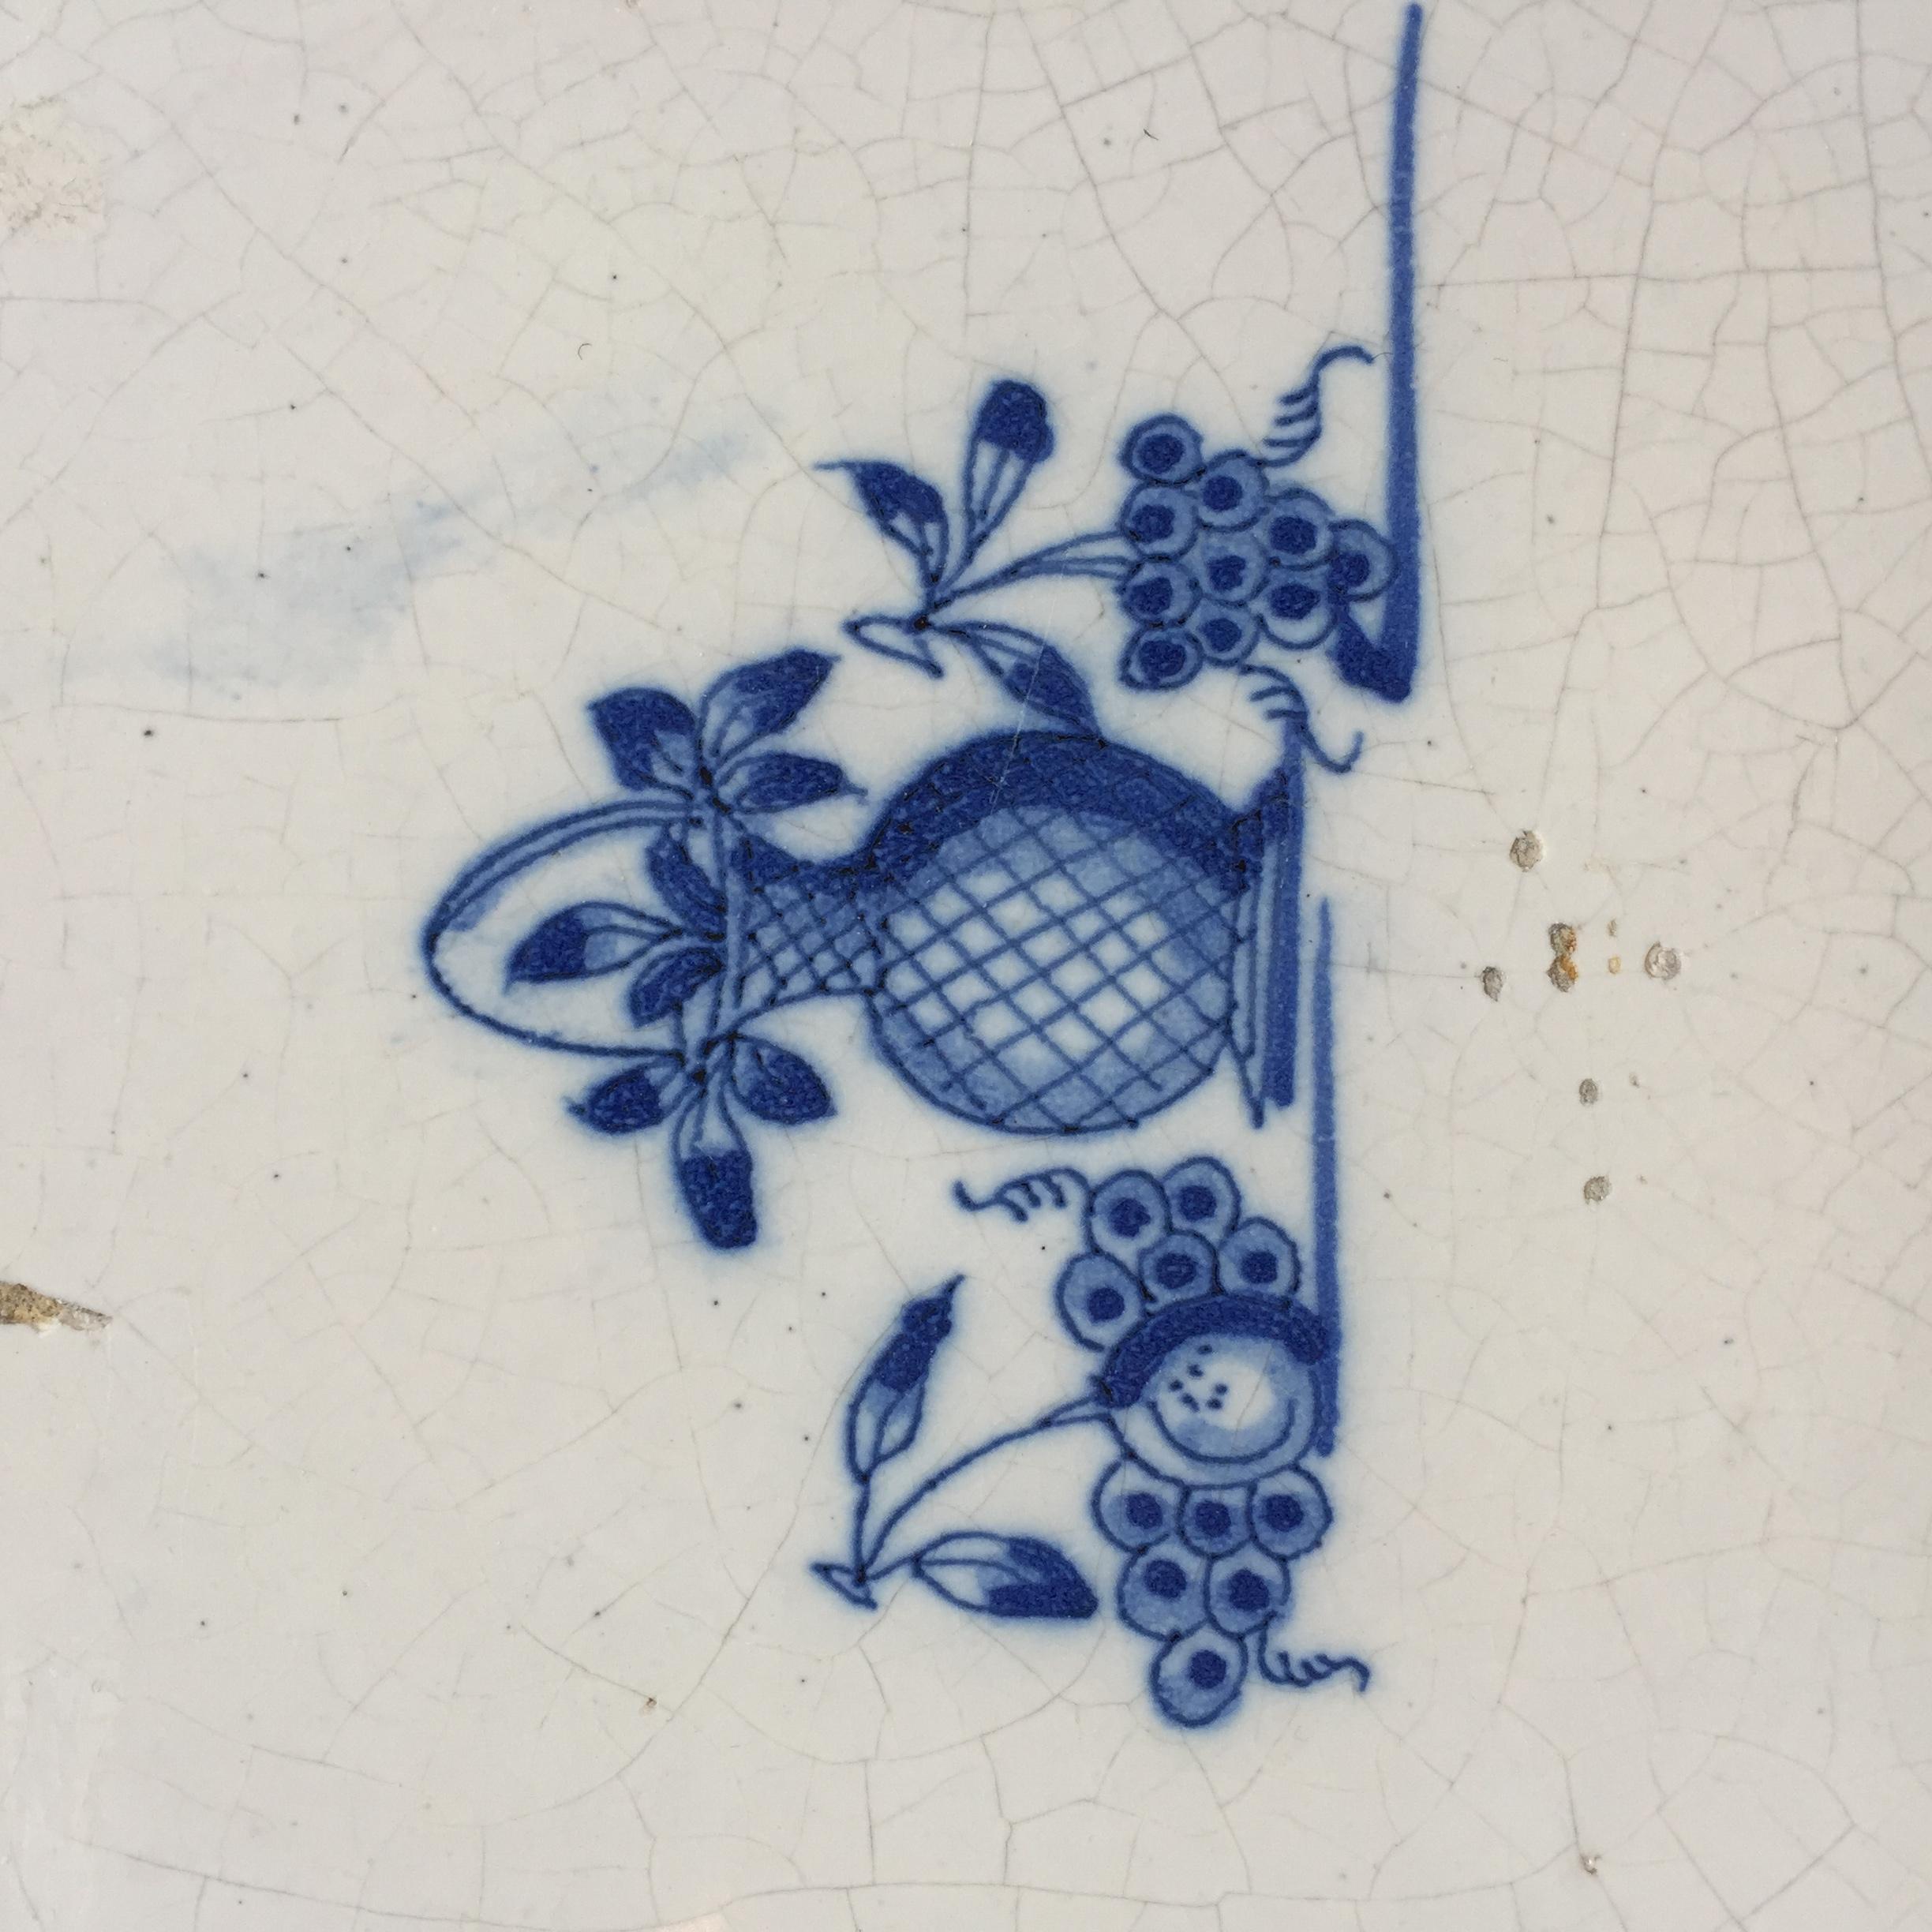 The Netherlands
Circa 1700

A fine blue and white Dutch tile with a still life painting of a vase with leaves and grapes and an apple on the sides.

The scene is painted without corner decoration to keep the focus completely on the still life